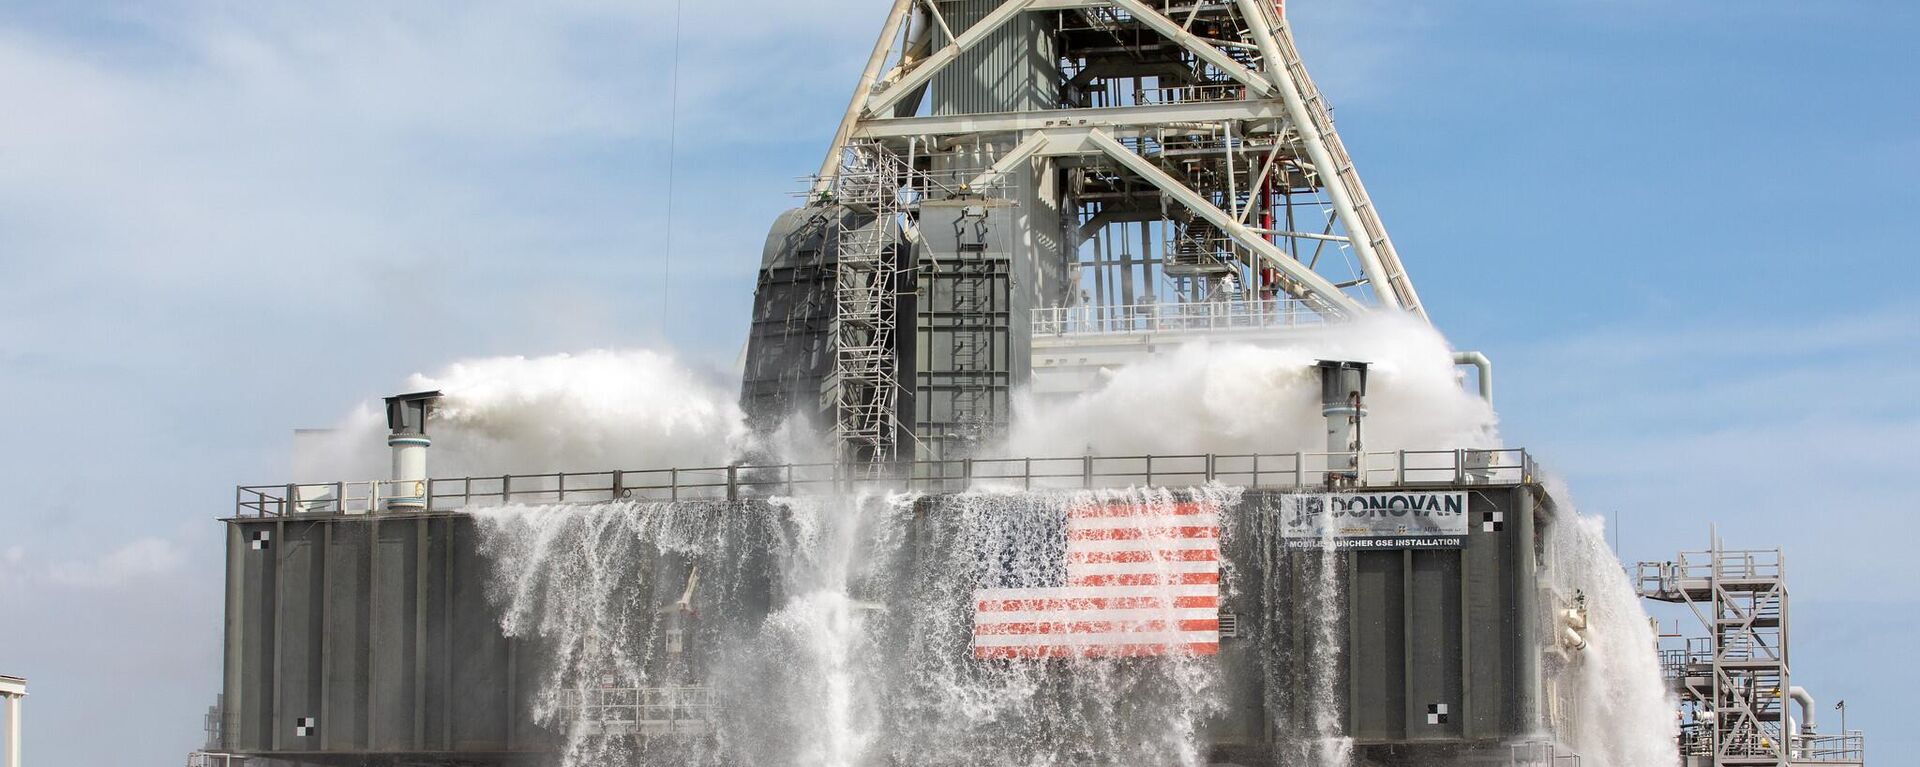 About 450,000 gallons of water poured onto the Pad B flame deflector, the mobile launcher flame hole and onto the launcher’s blast deck during NASA's water flow test on September 13, 2019.  - Sputnik International, 1920, 20.07.2022